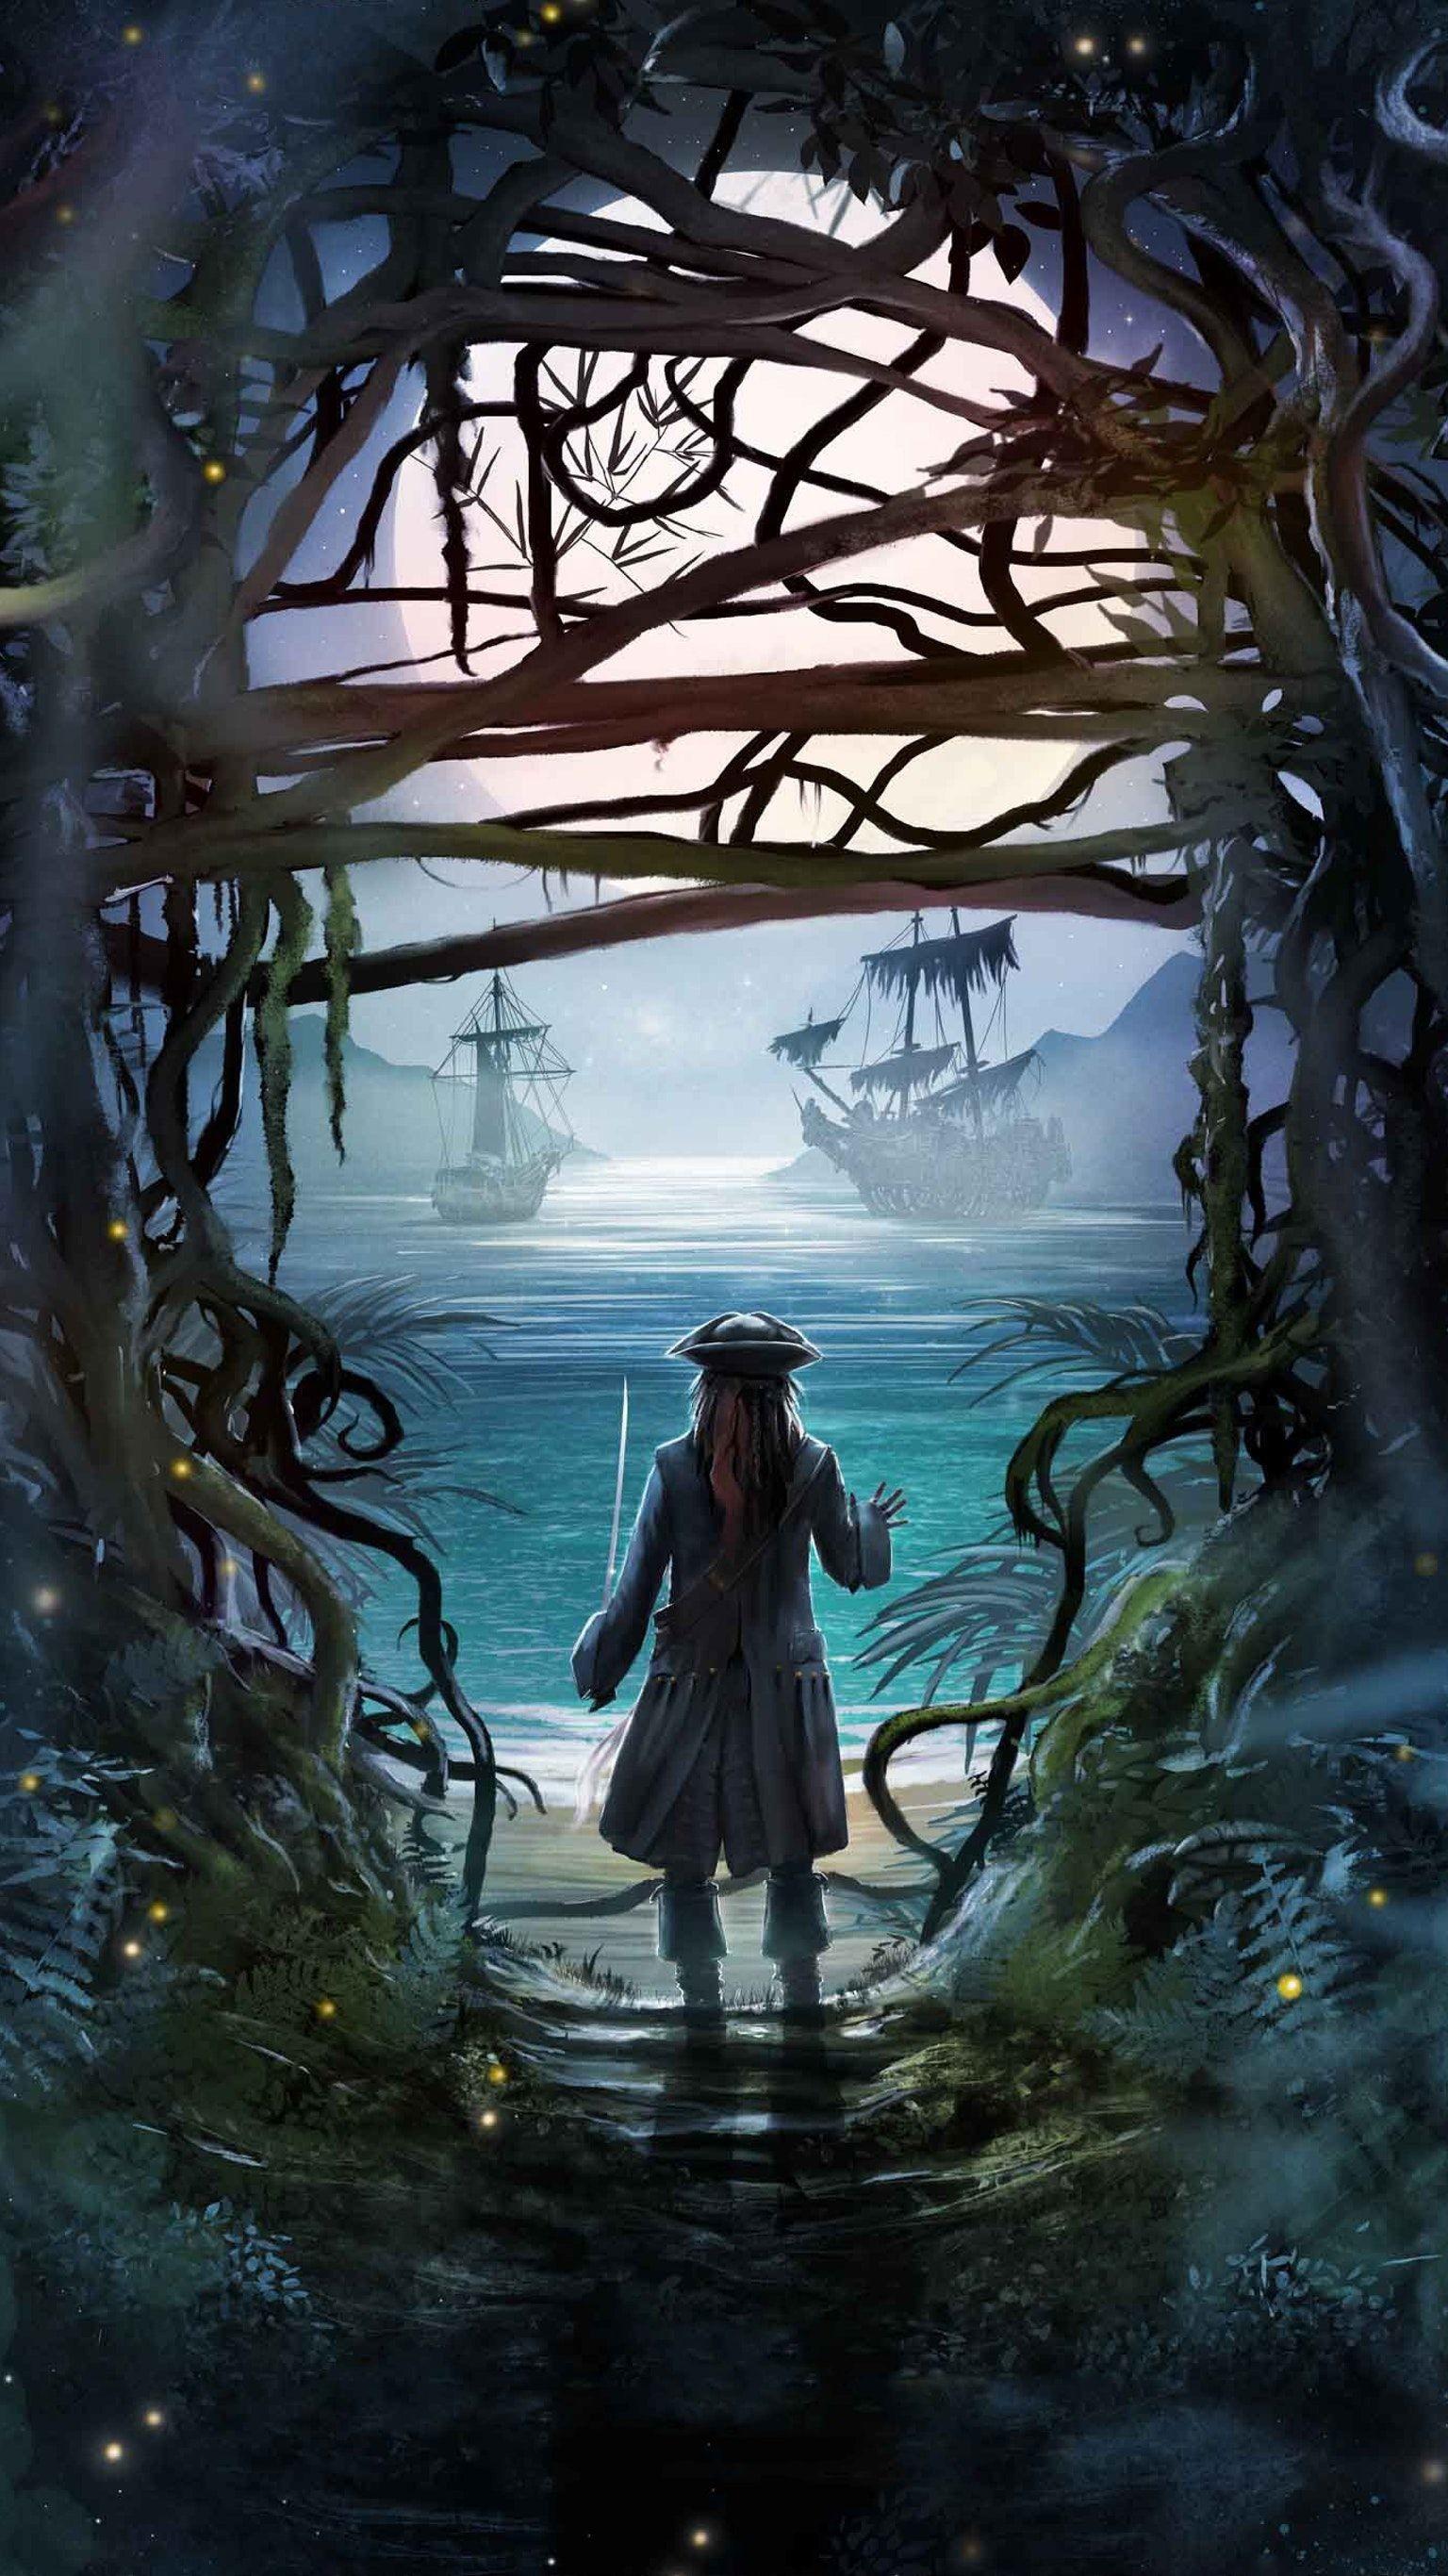 Pirates of the Carribean Wallpaper